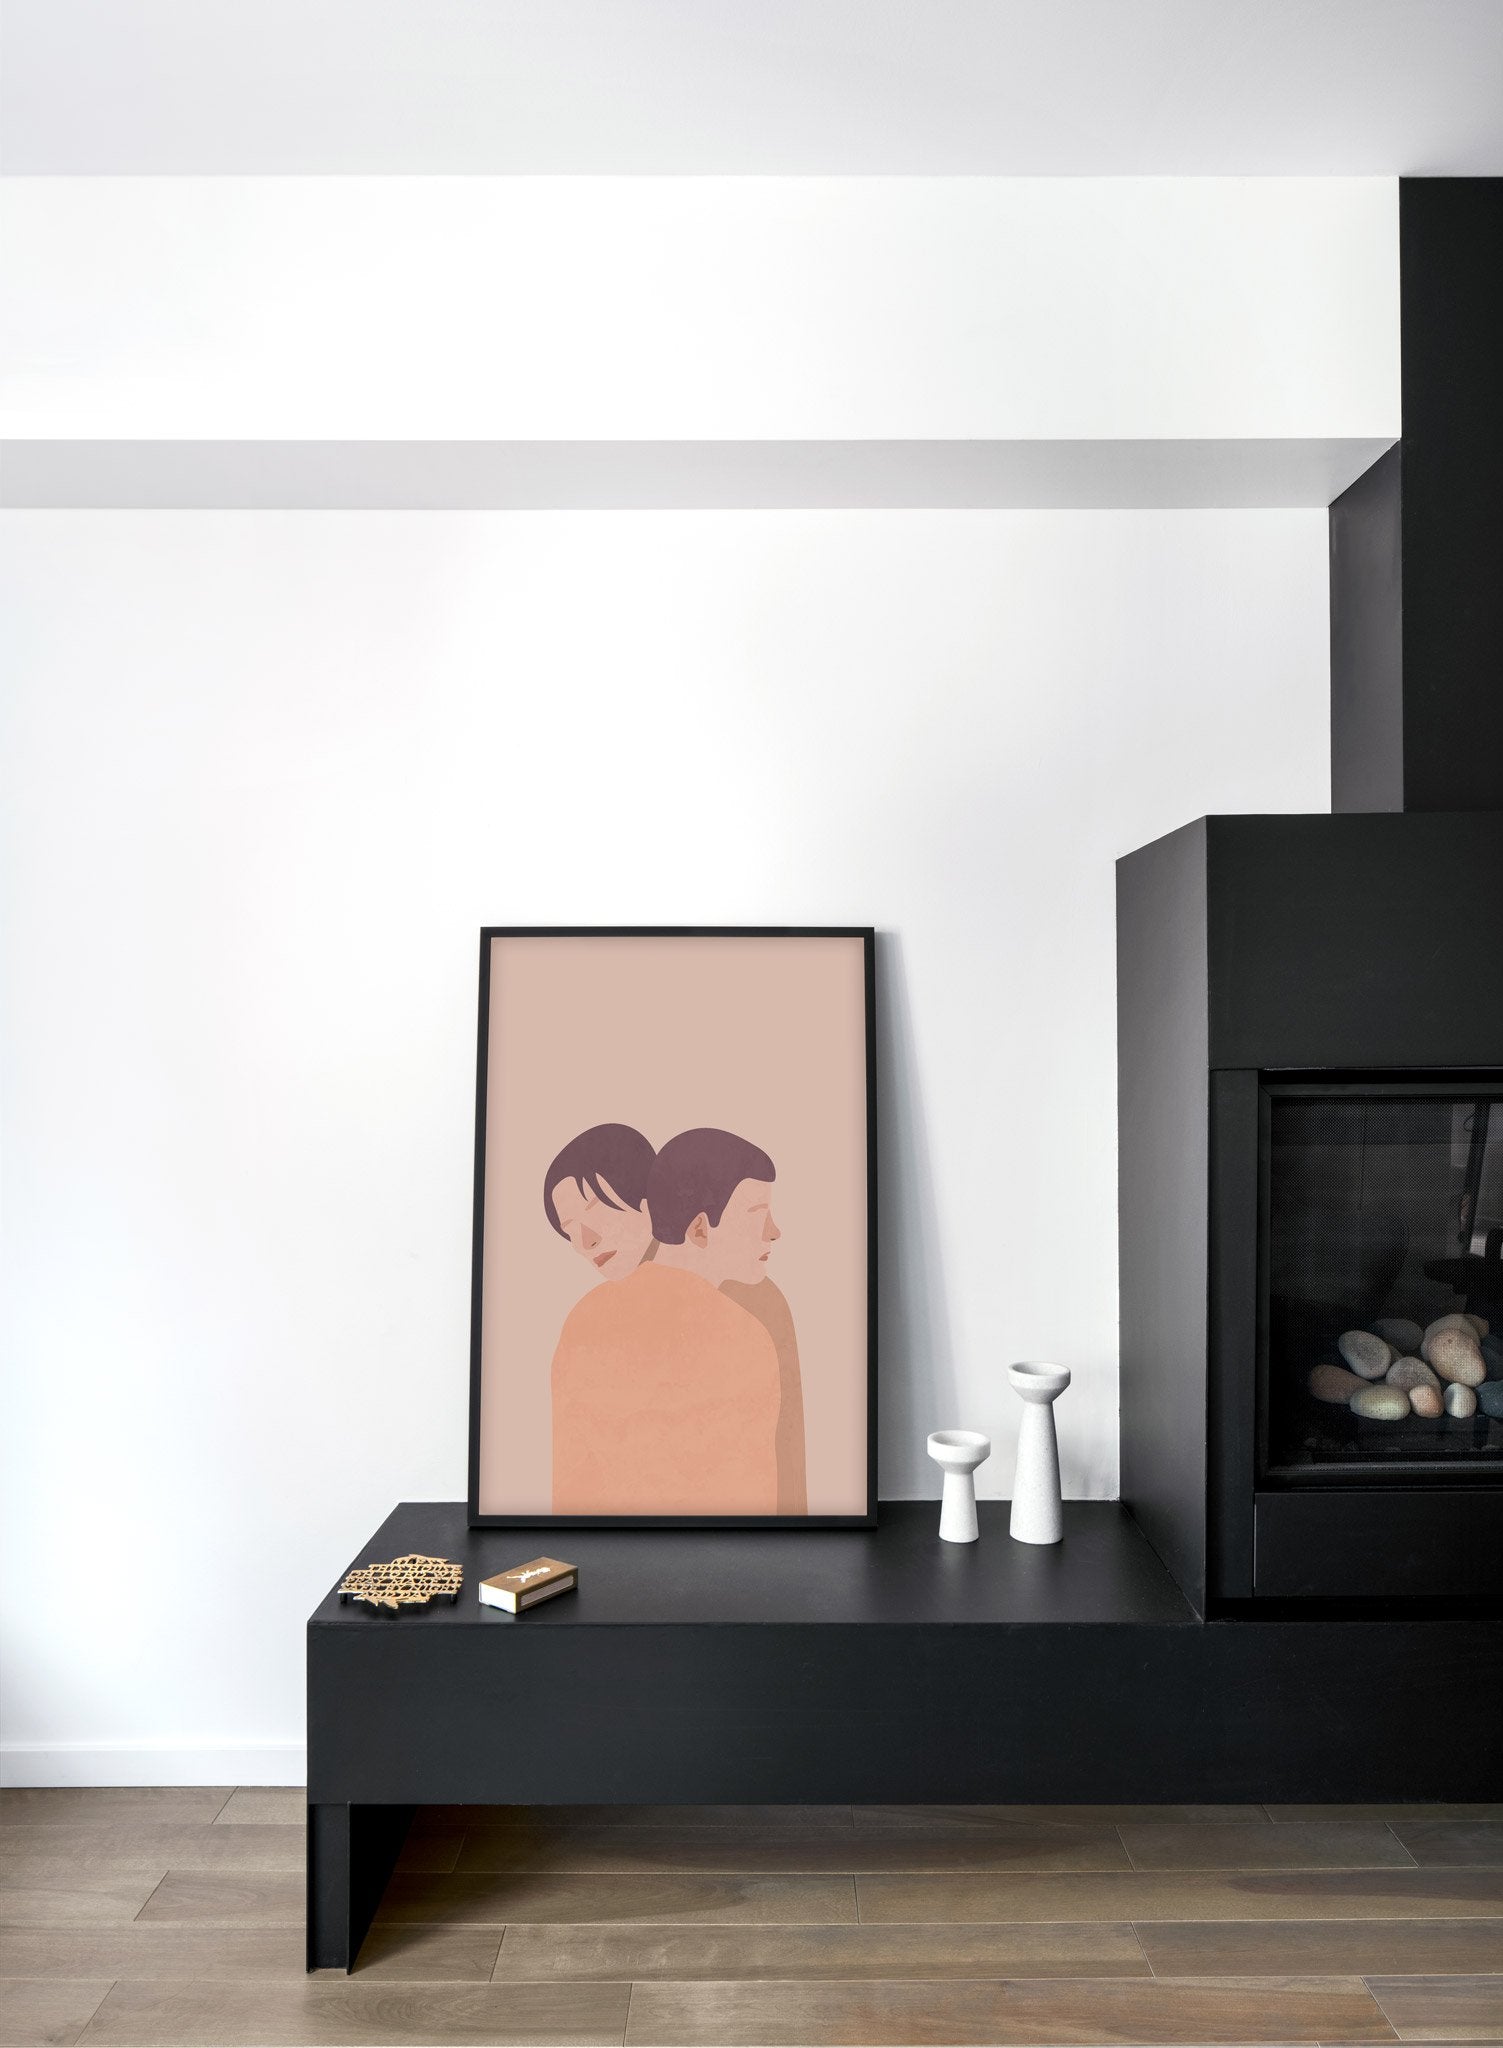 "Proximity in Beige" is a minimalist and romantic illustration poster by Opposite Wall of couple hugging lovingly in shades of beige, brown and orange.